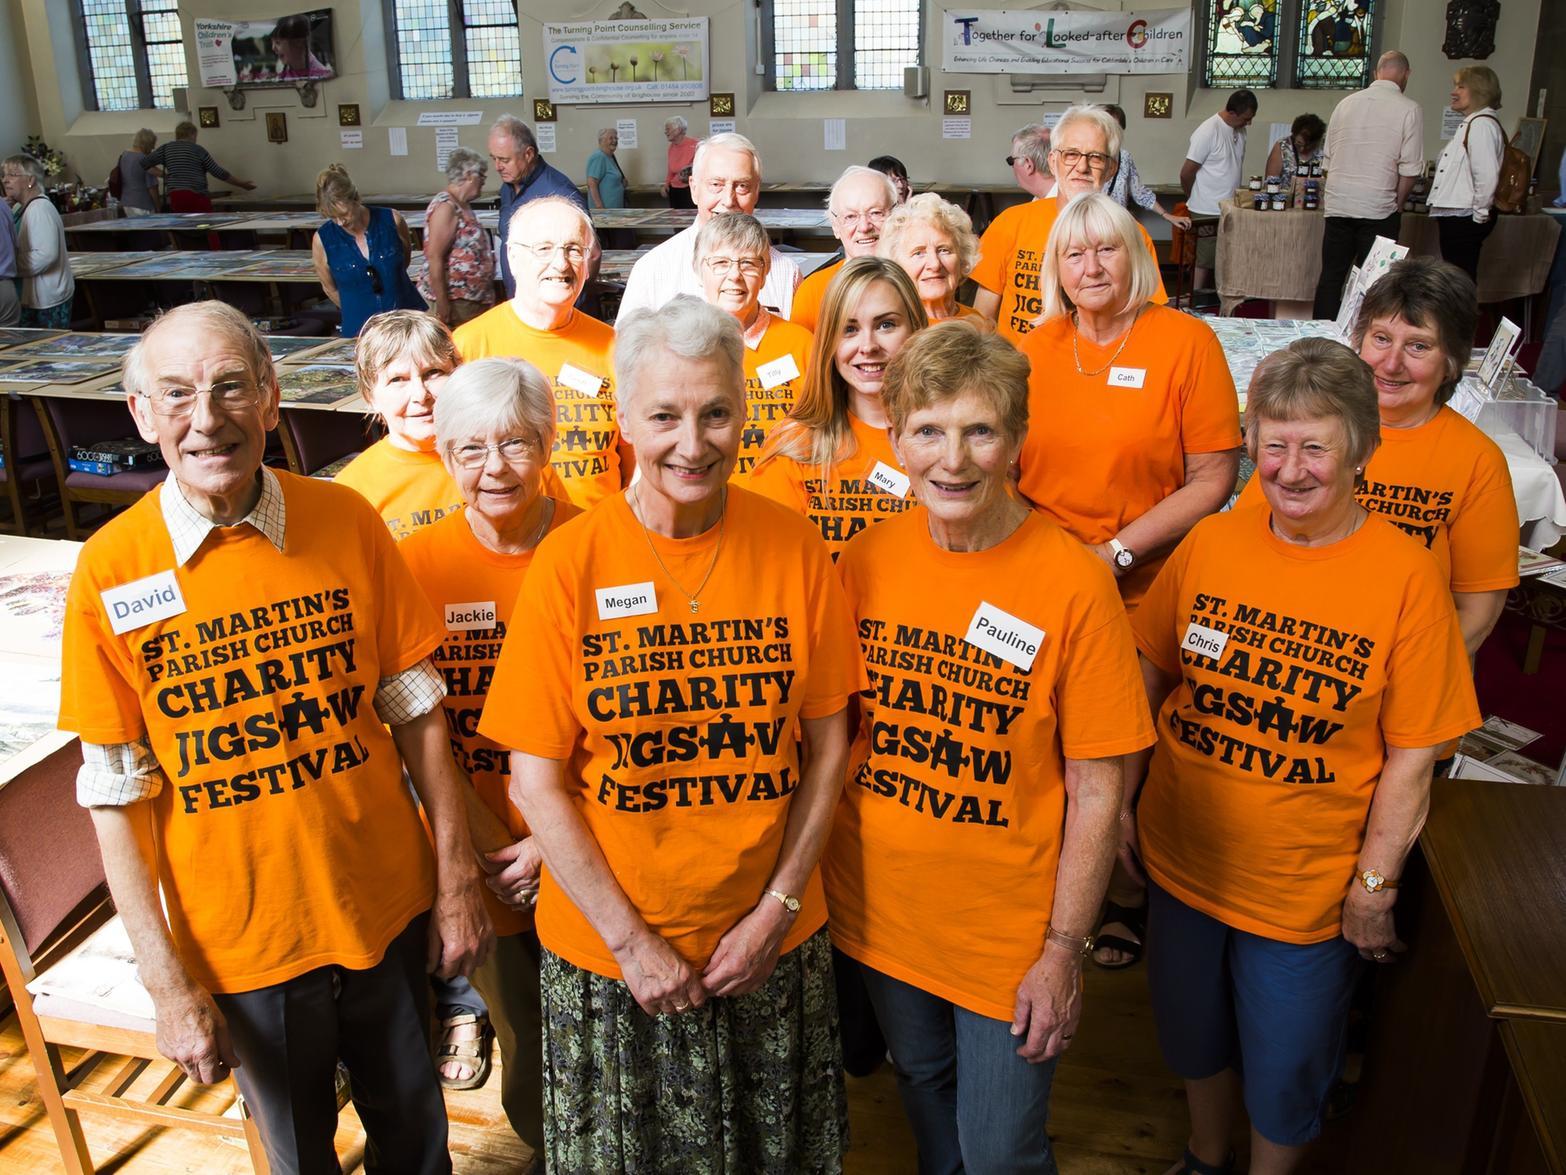 Brighouse Jigsaw Festival will of course be returning in 2020 St Martins Church. The event will run from August 28 to 31 and include a variety of jigsaws as well as jams, preserves and hand made cards and more.